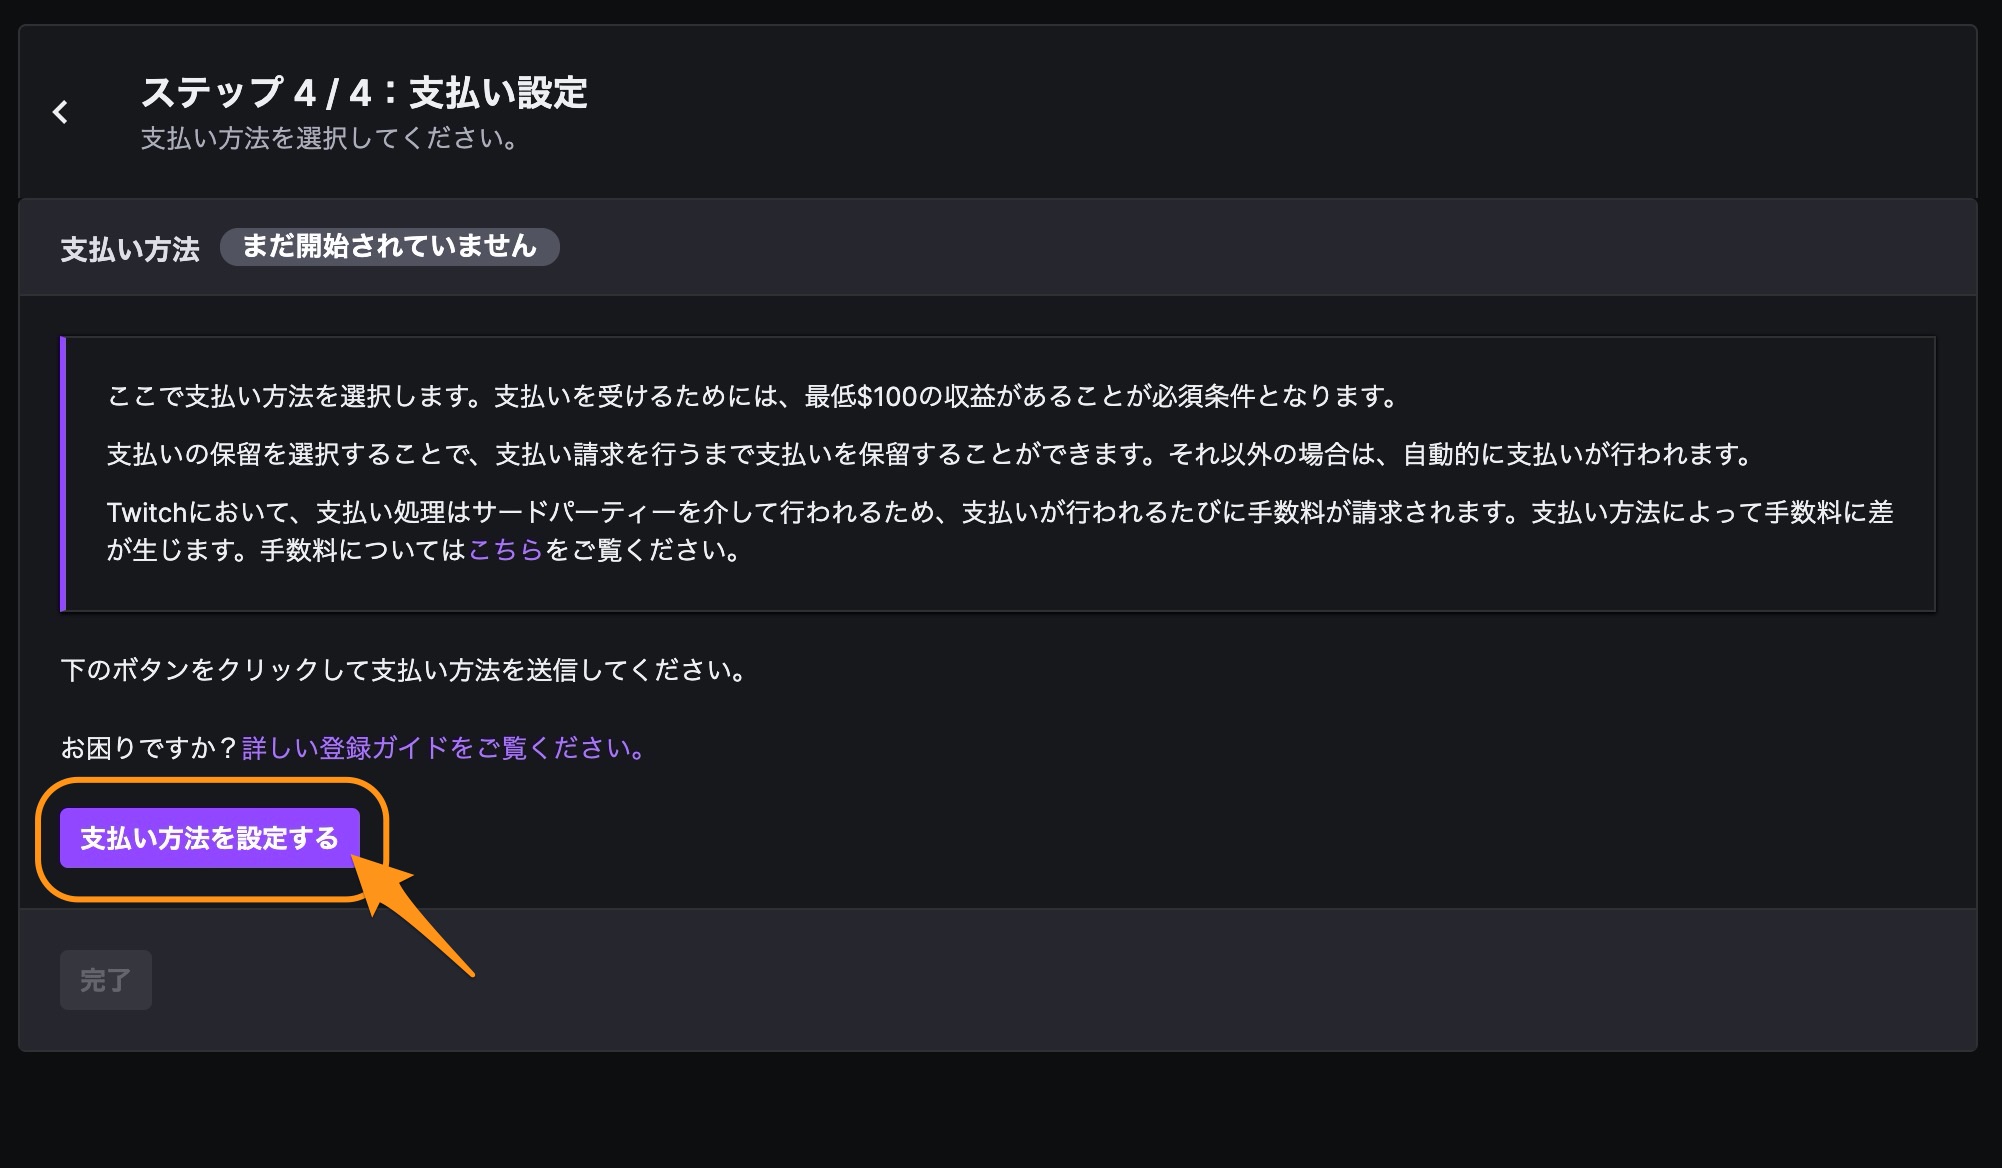 Twitch アフィリエイト登録の全方法まとめ 必要な設定方法を解説します 21年版 Tipstour